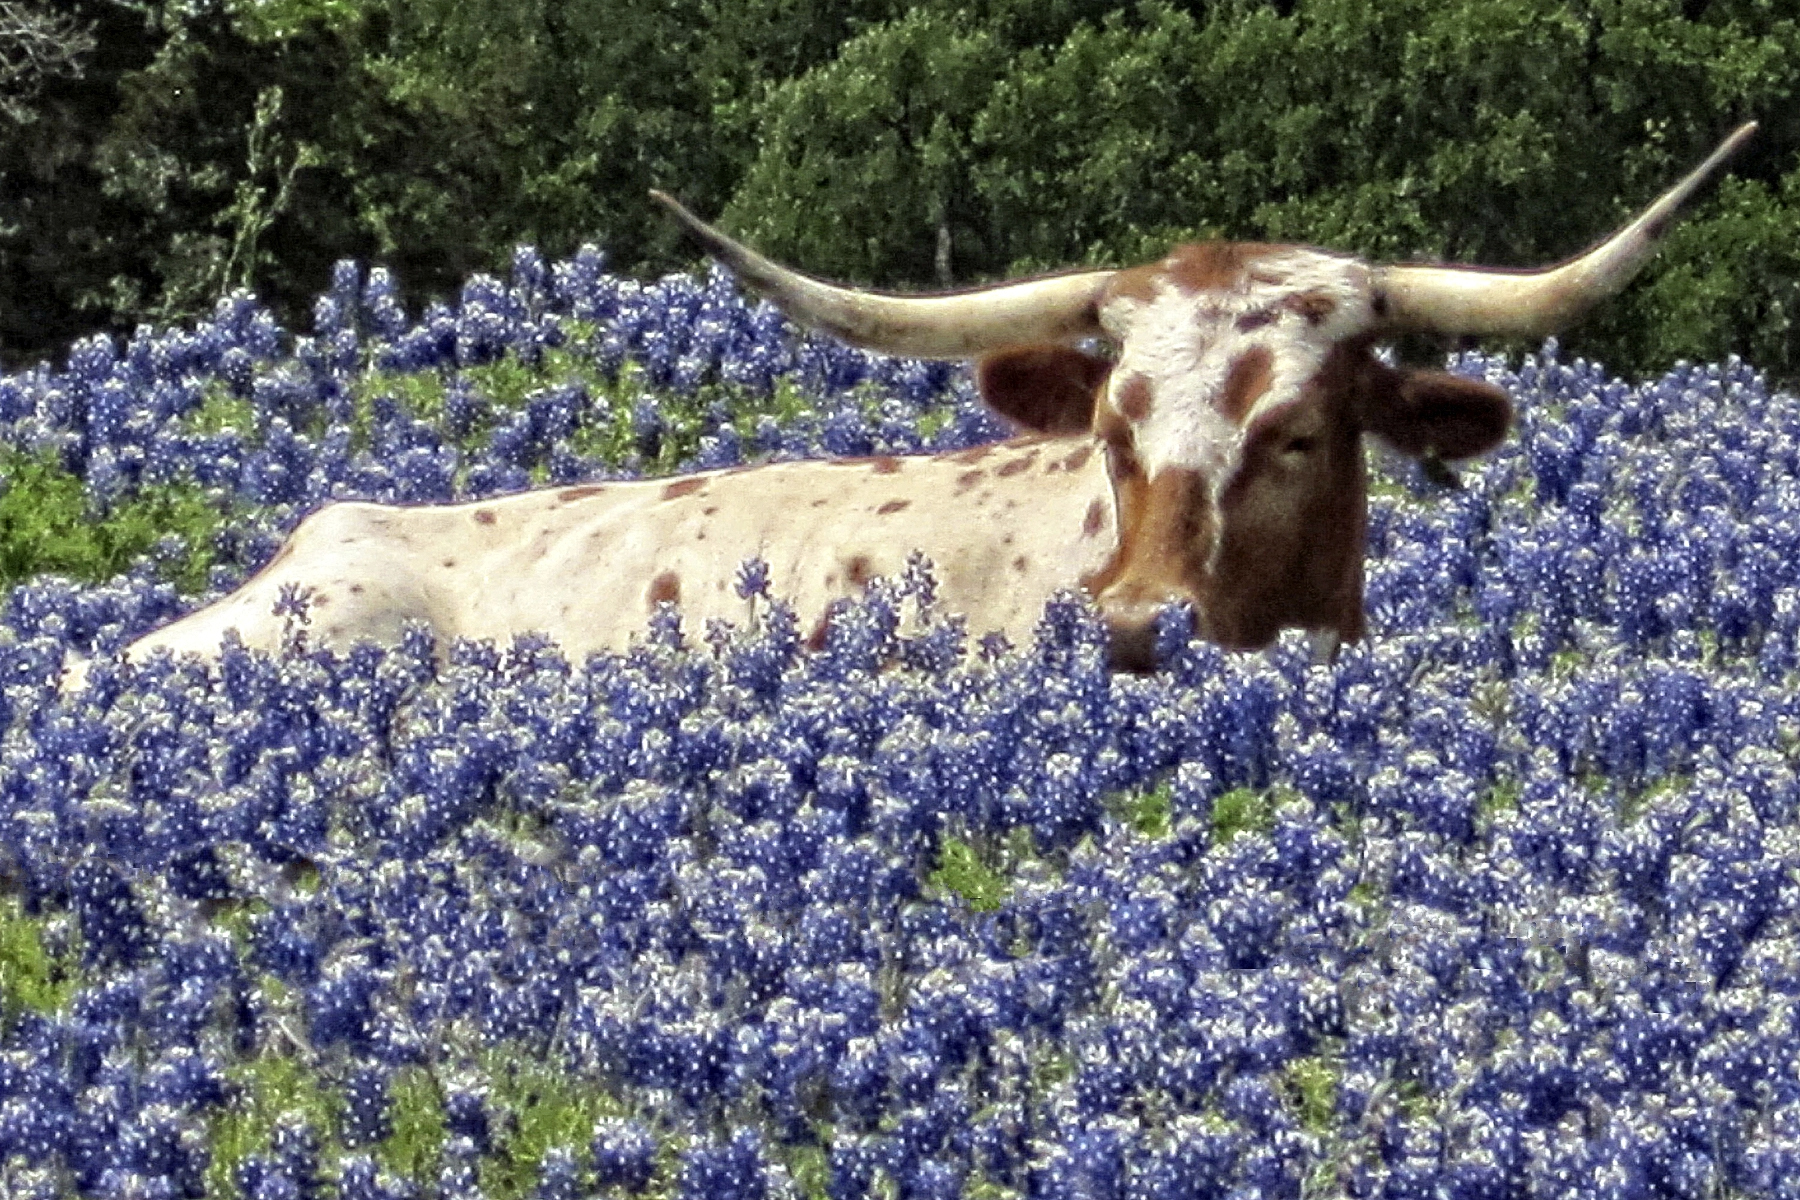 A Texas Longhorn lying down in a gorgeous field of Bluebonnets..... a real sign of spring in Texas.